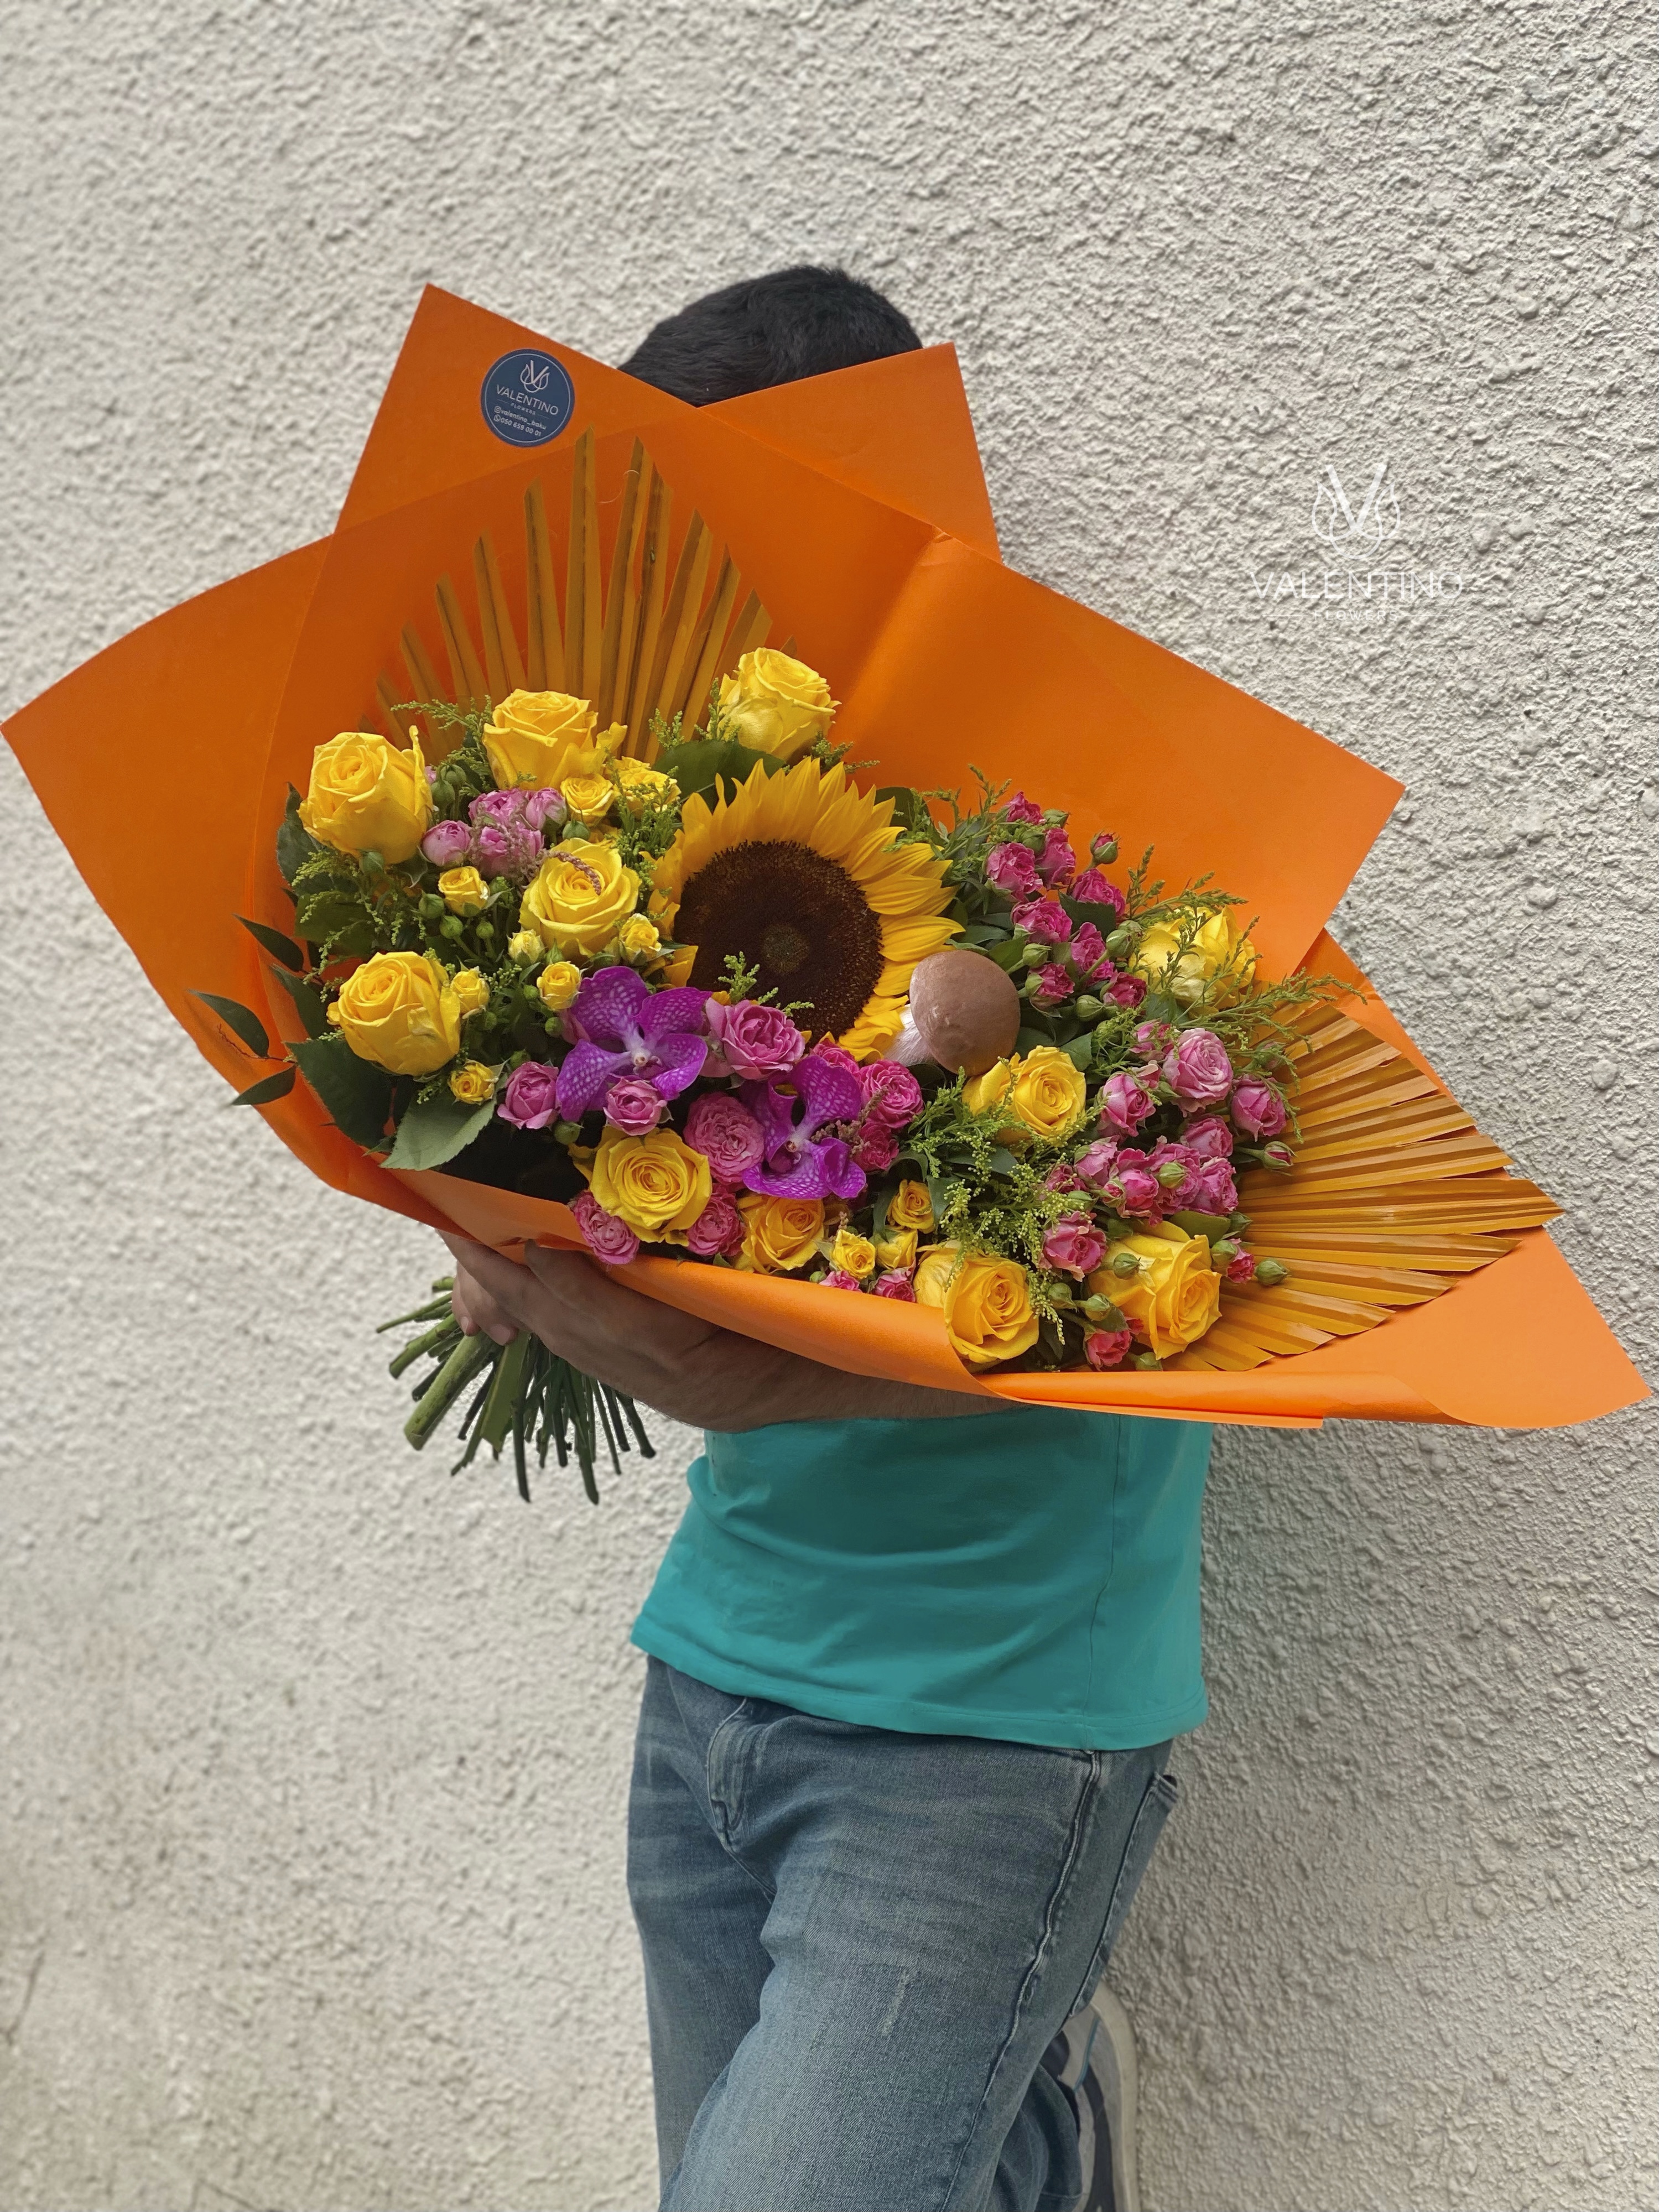 Sunflower and Van in the bouquet